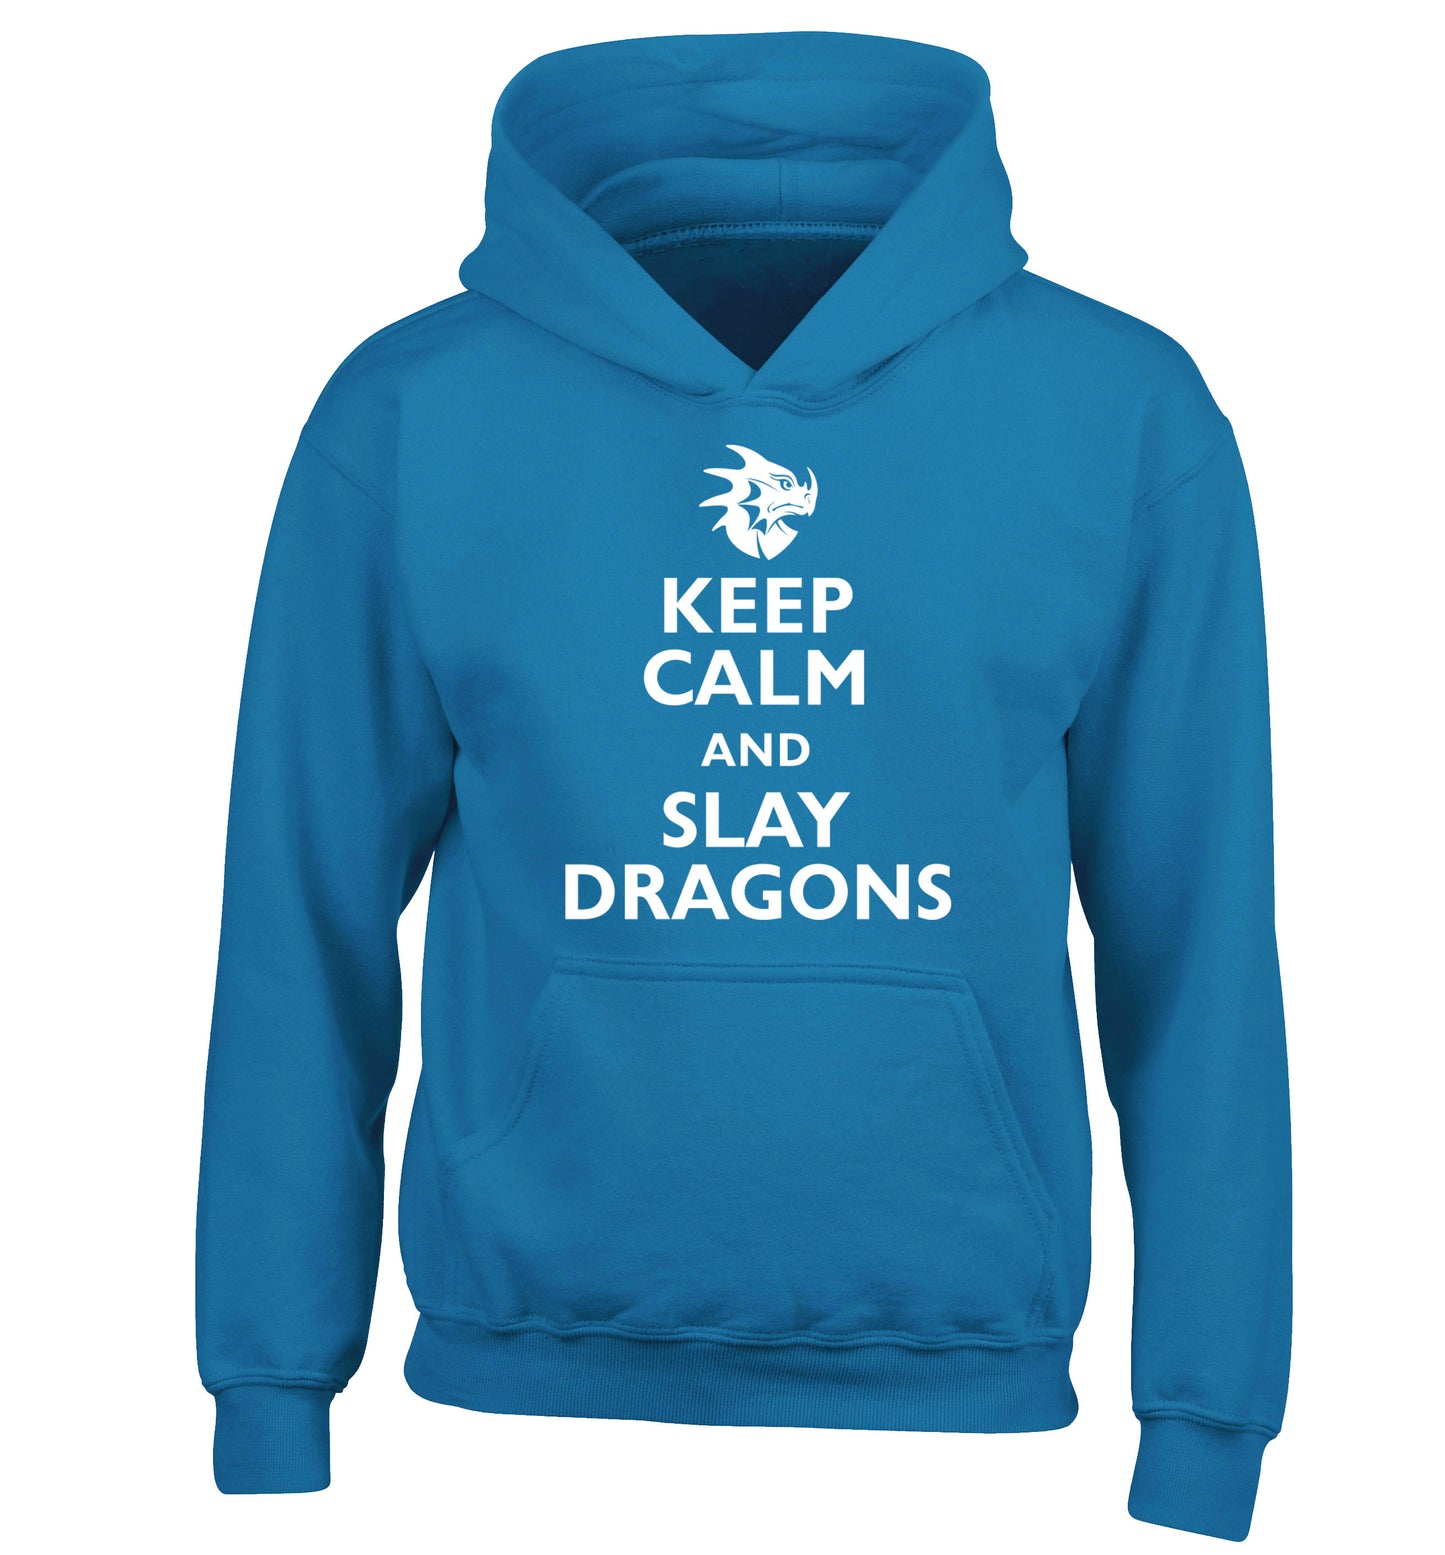 Keep calm and slay dragons children's blue hoodie 12-14 Years